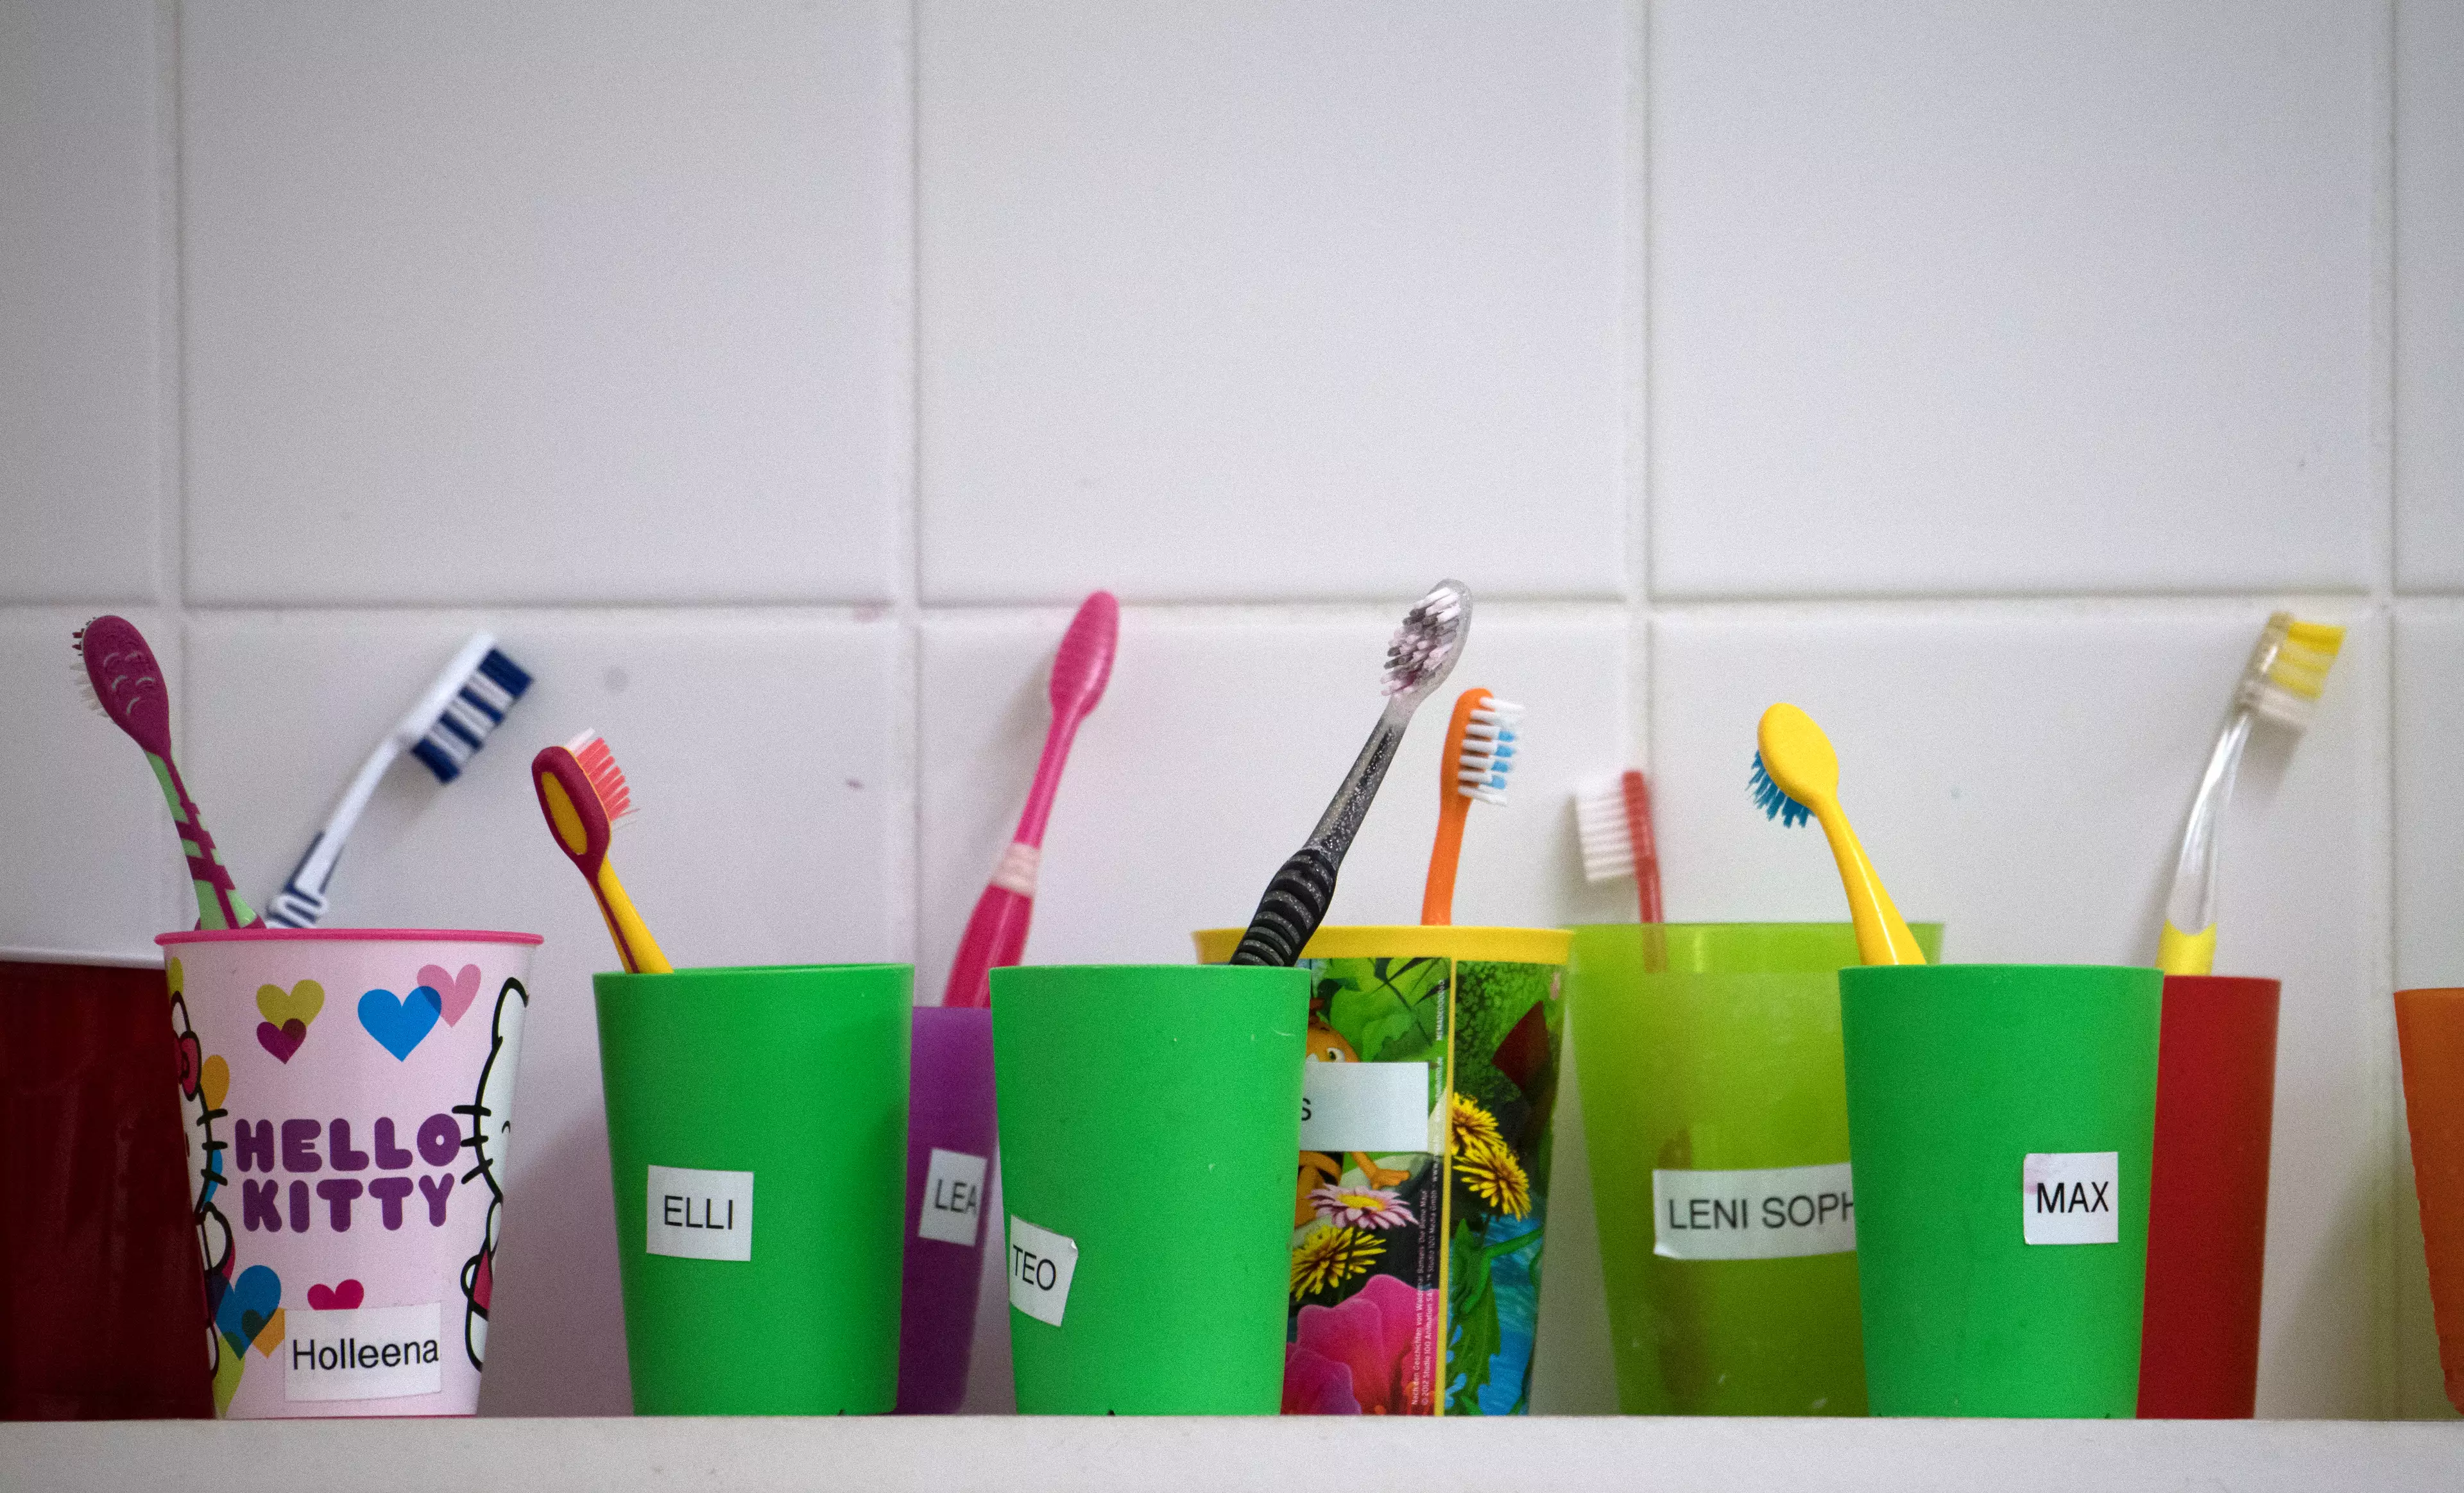 The study that toothbrushes kept in the bathroom could be spattered with faeces.